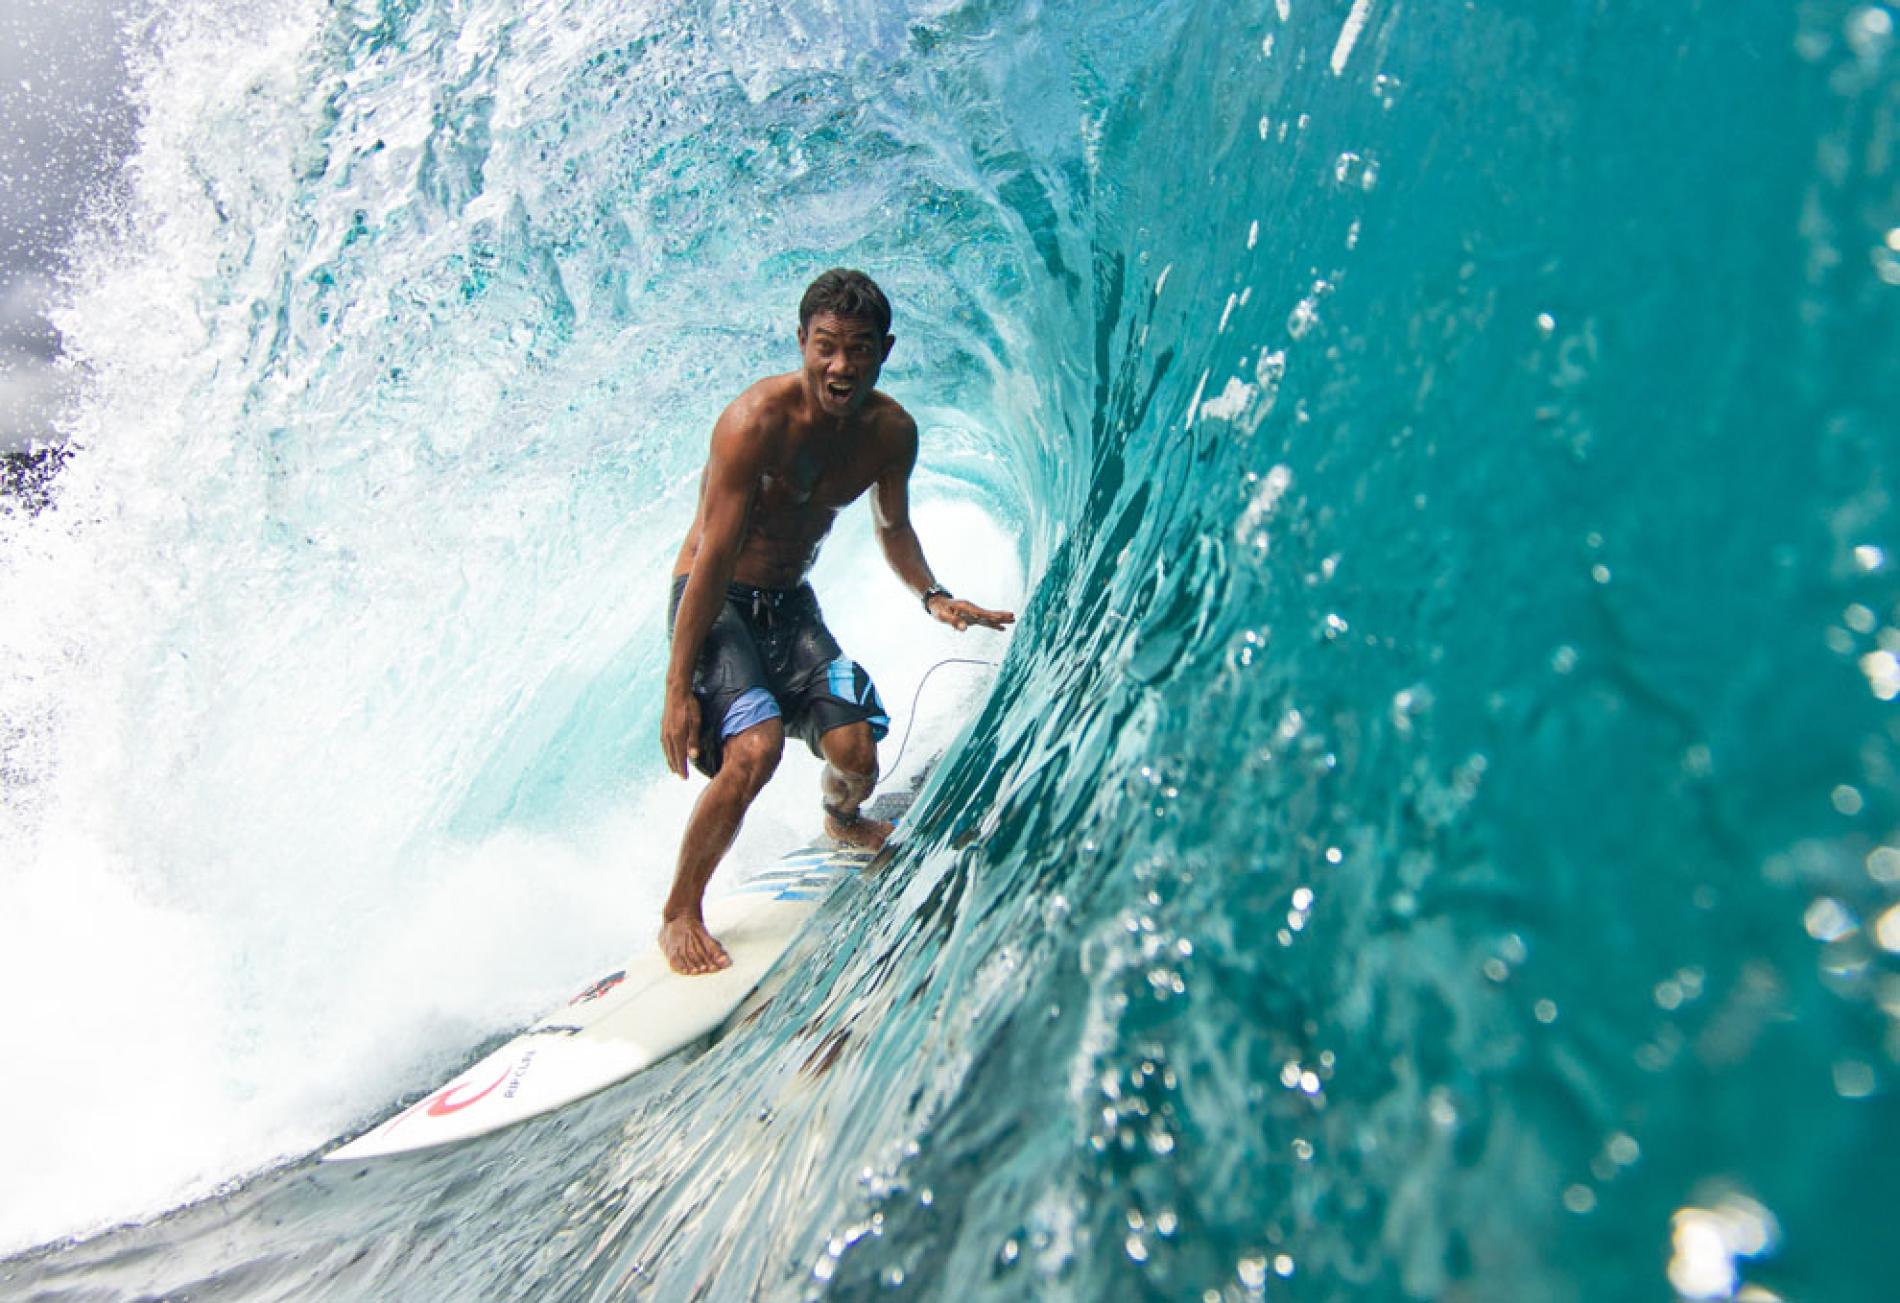 Your Surfing Photos -- National Geographic